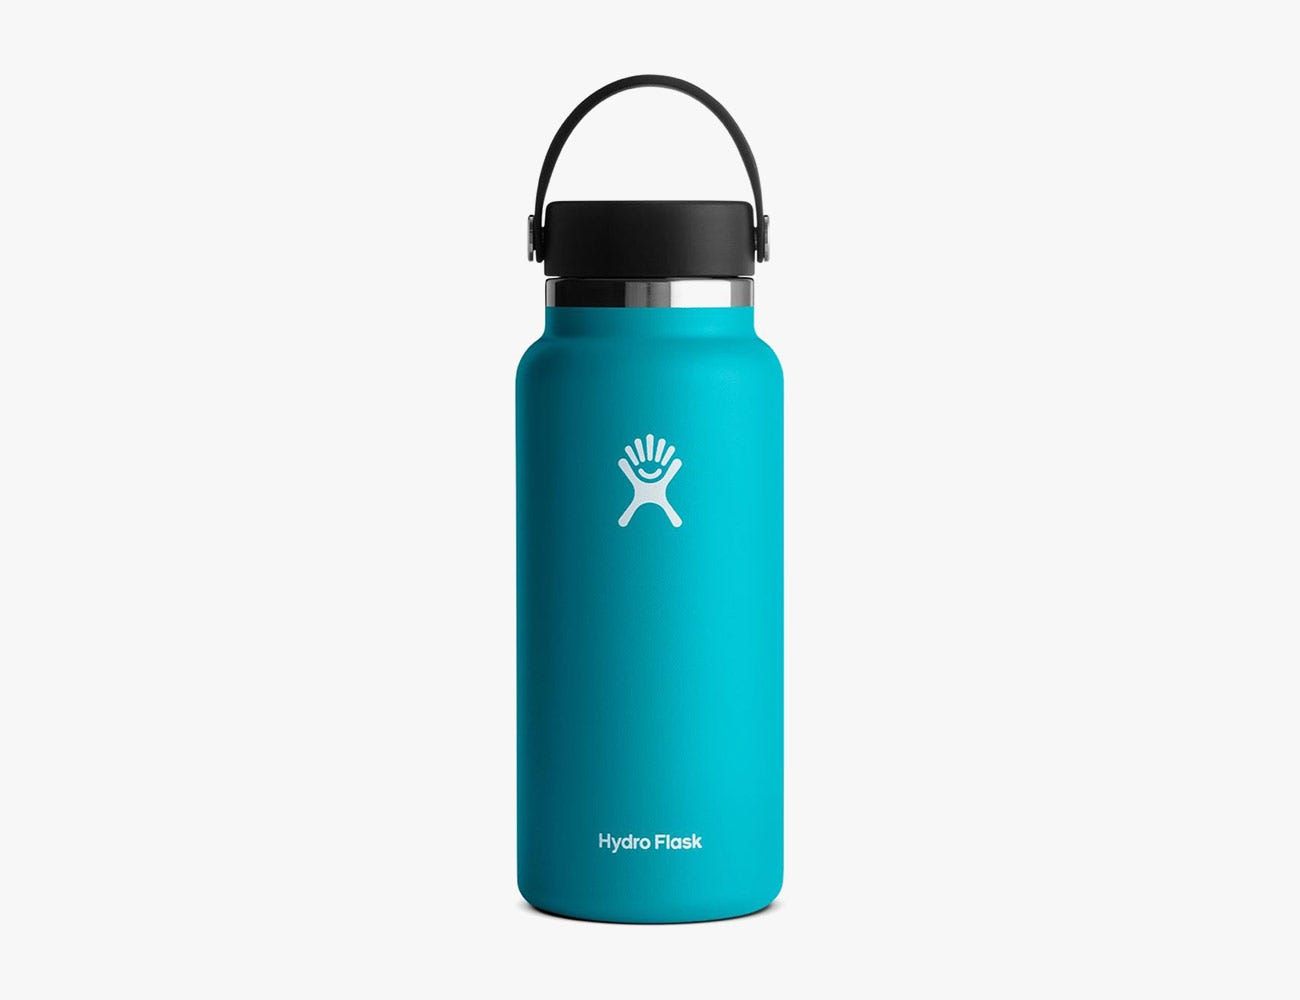 Hydro Flask Vs. Yeti: Who Makes the Better Water Bottle?